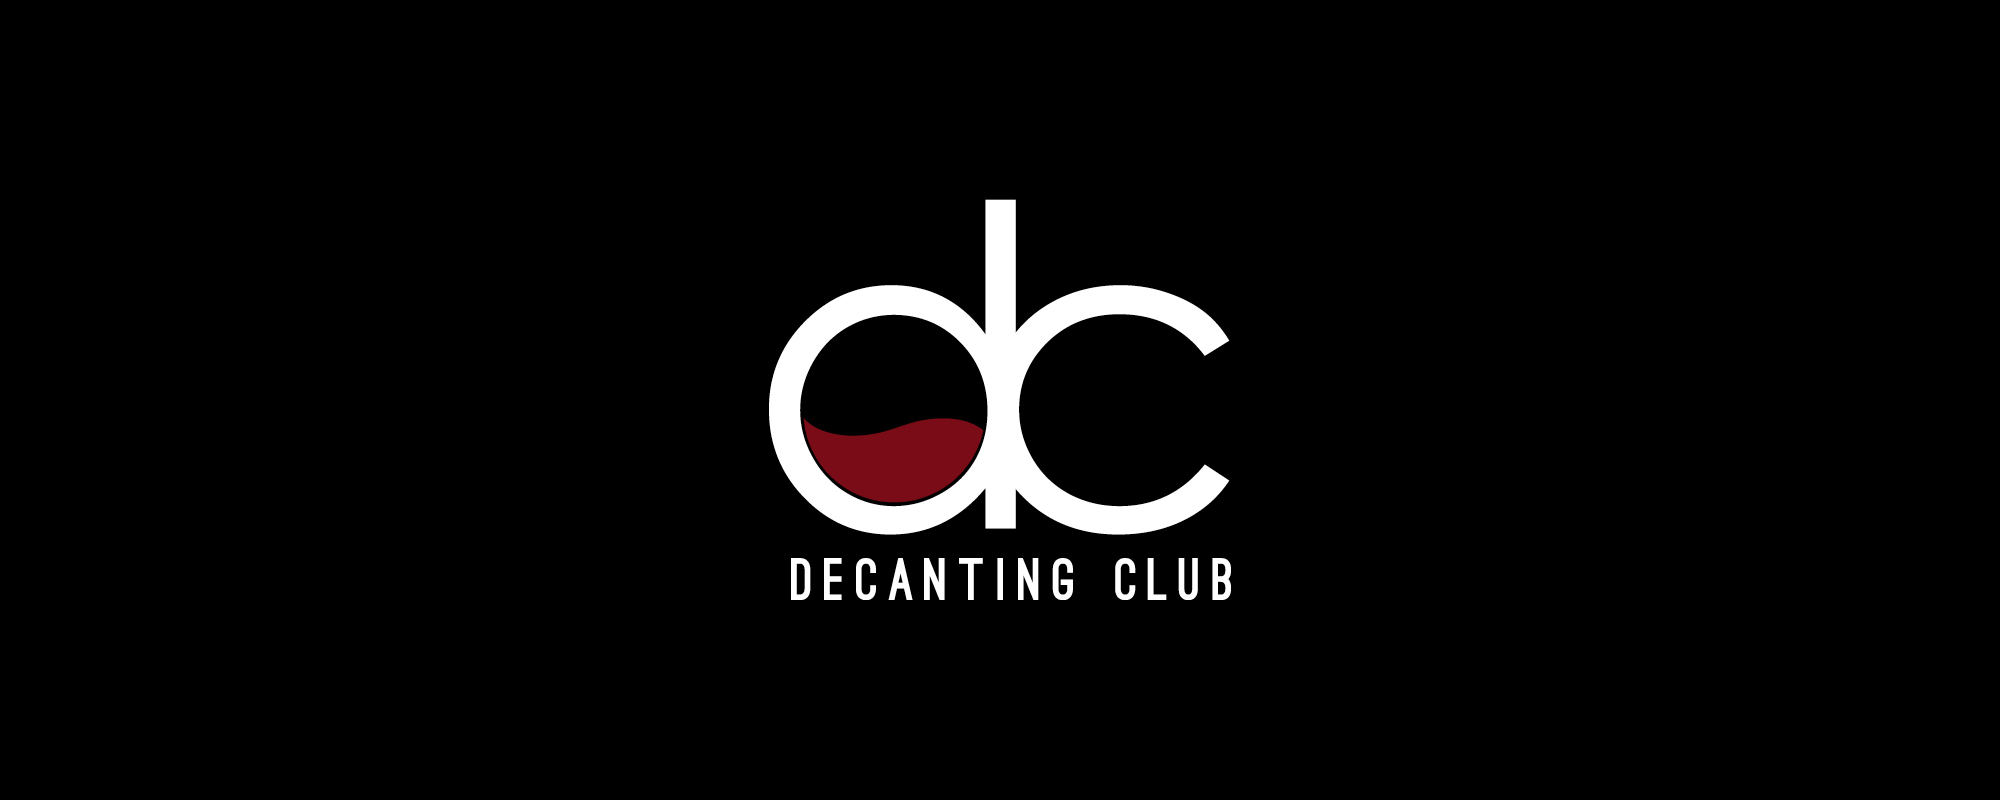 Decanting Club Cover Image.jpg